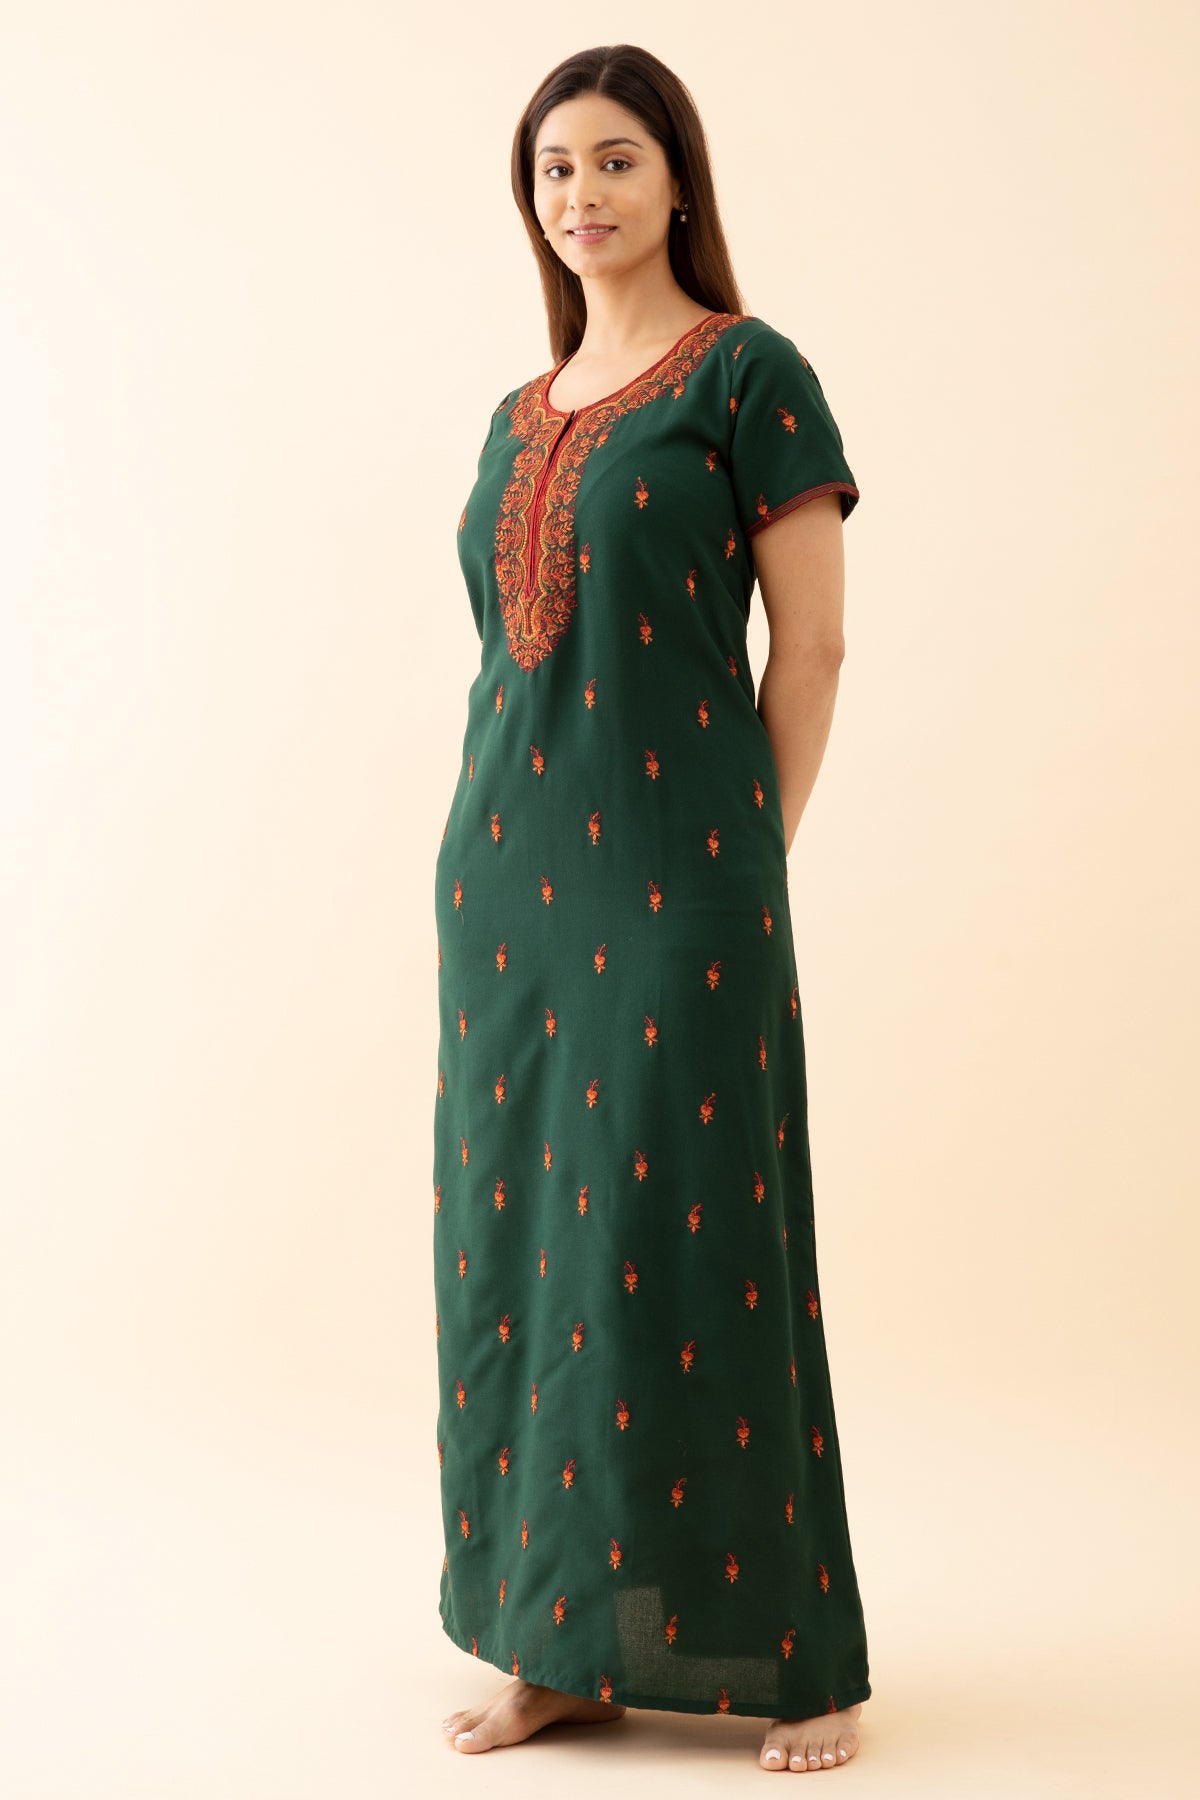 Solid With Contrast Whimsical Garden Embroidered Yoke - Green